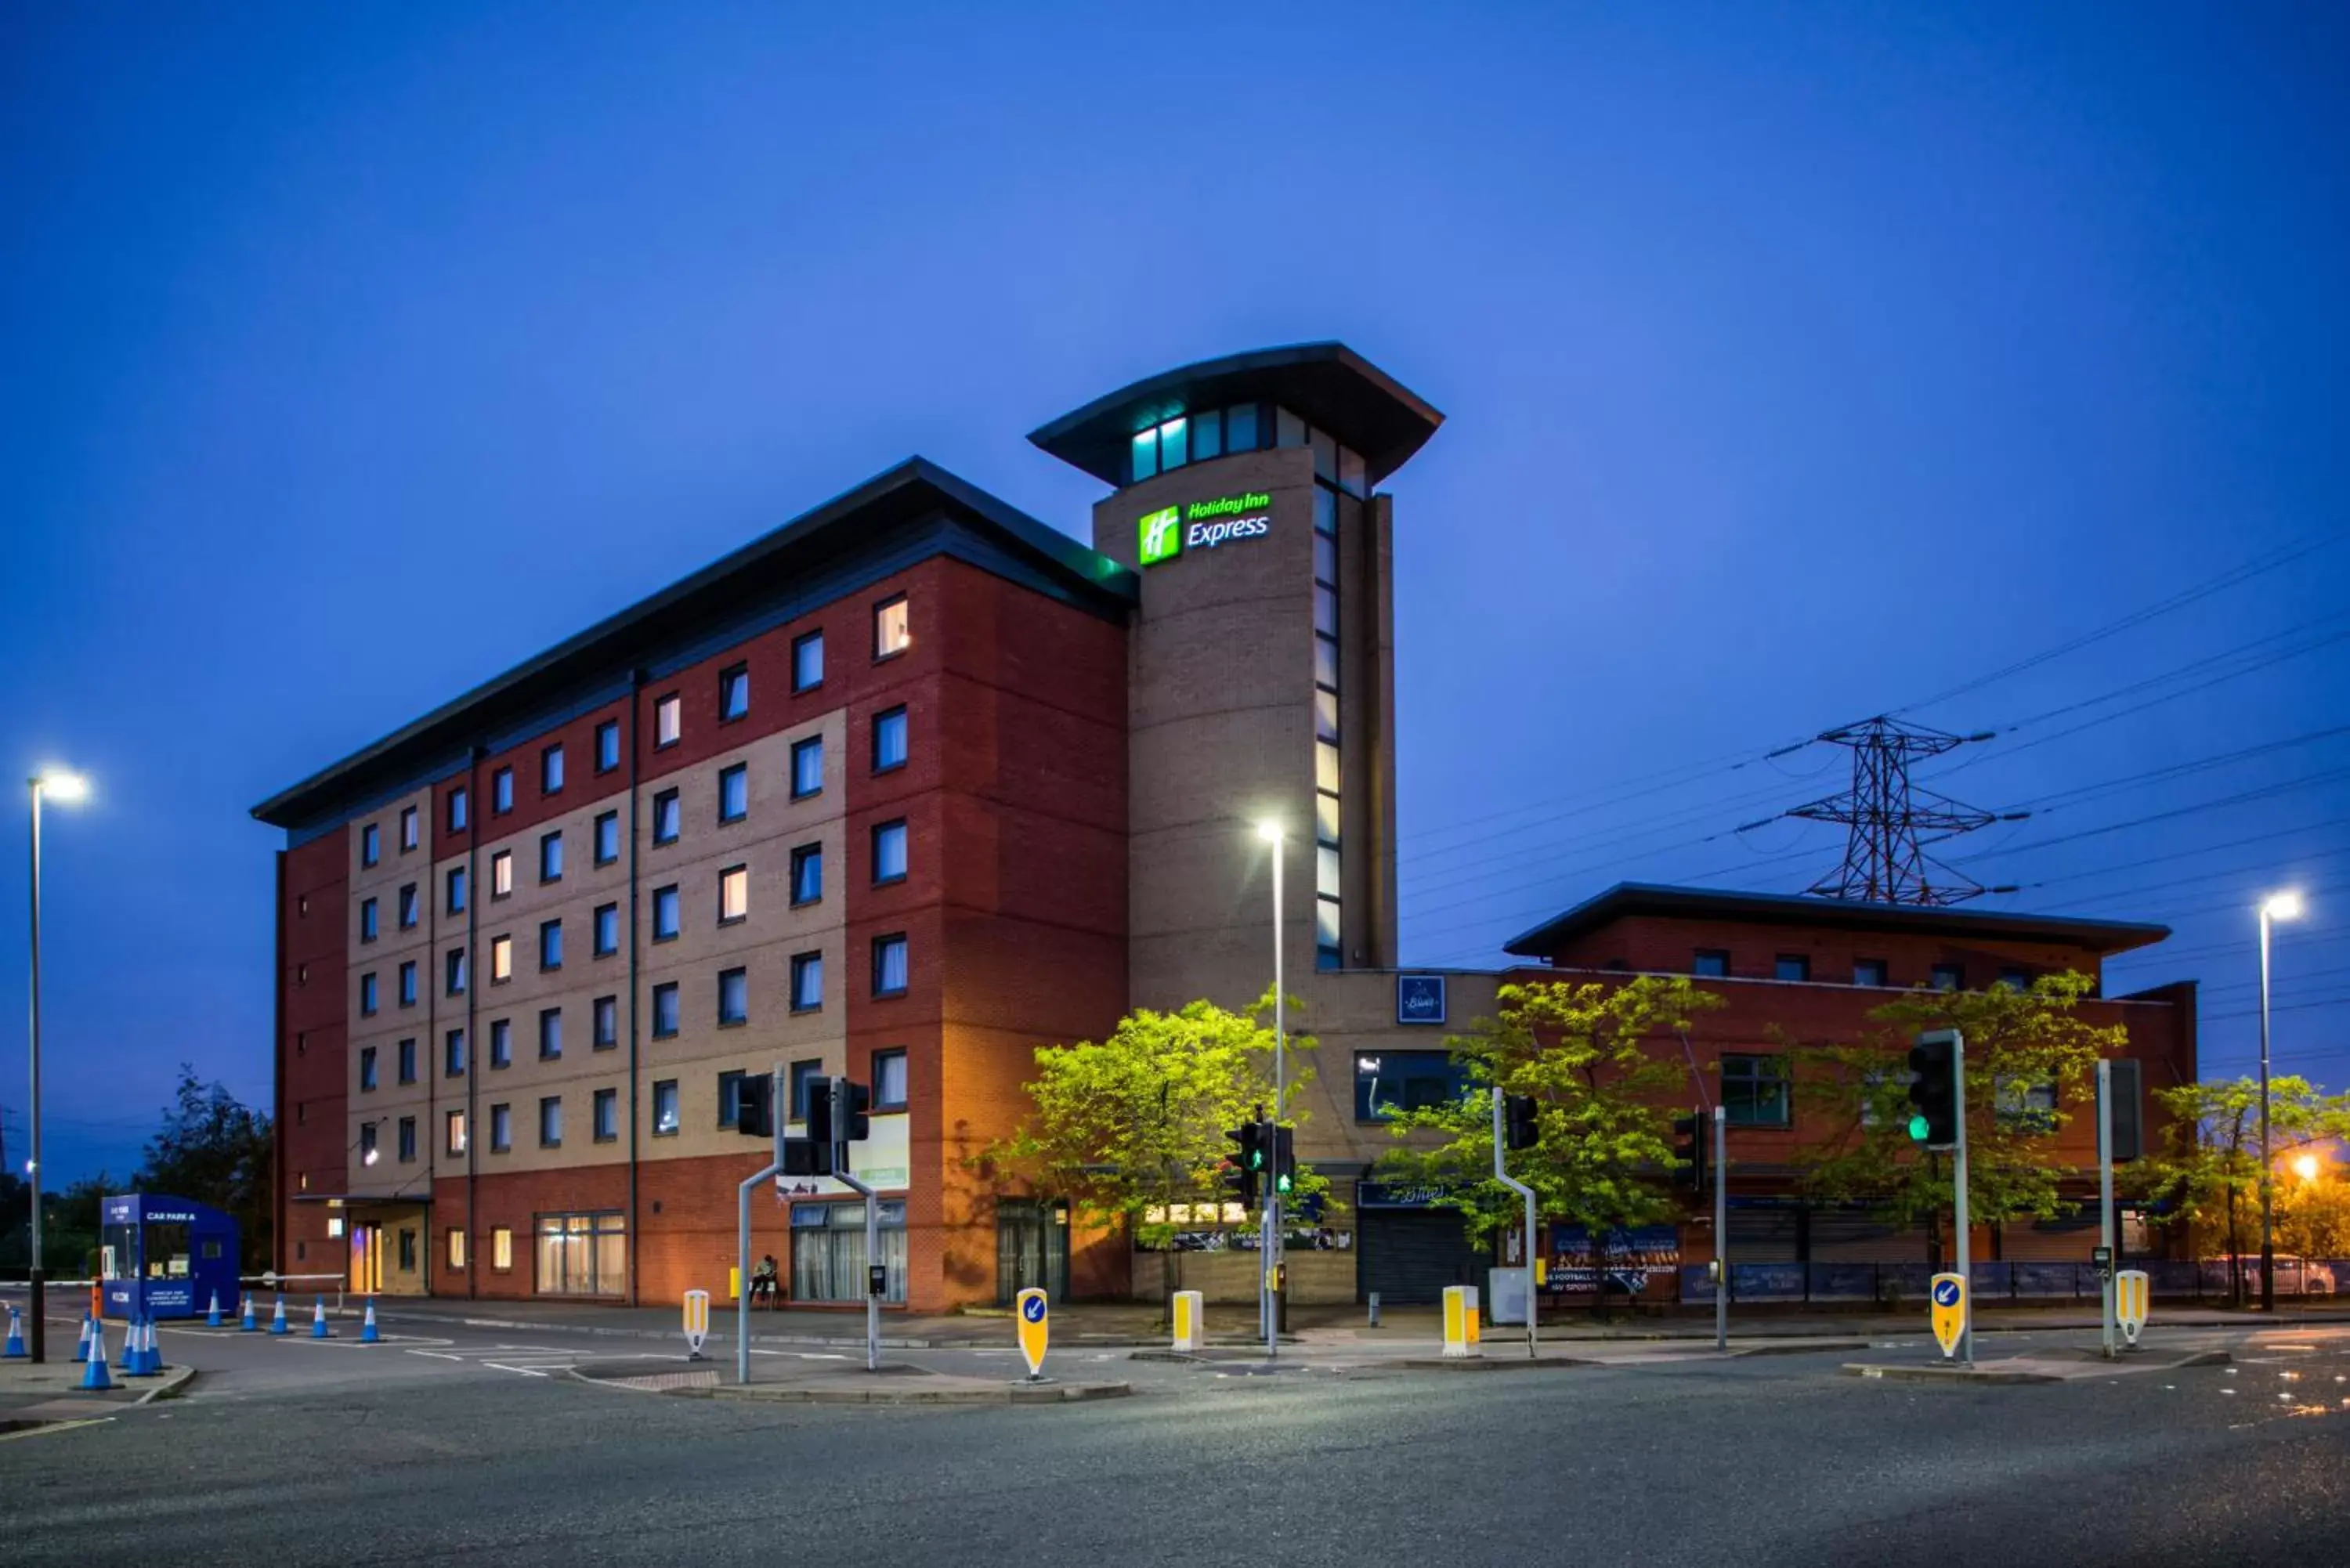 Property Building in Holiday Inn Express Leicester